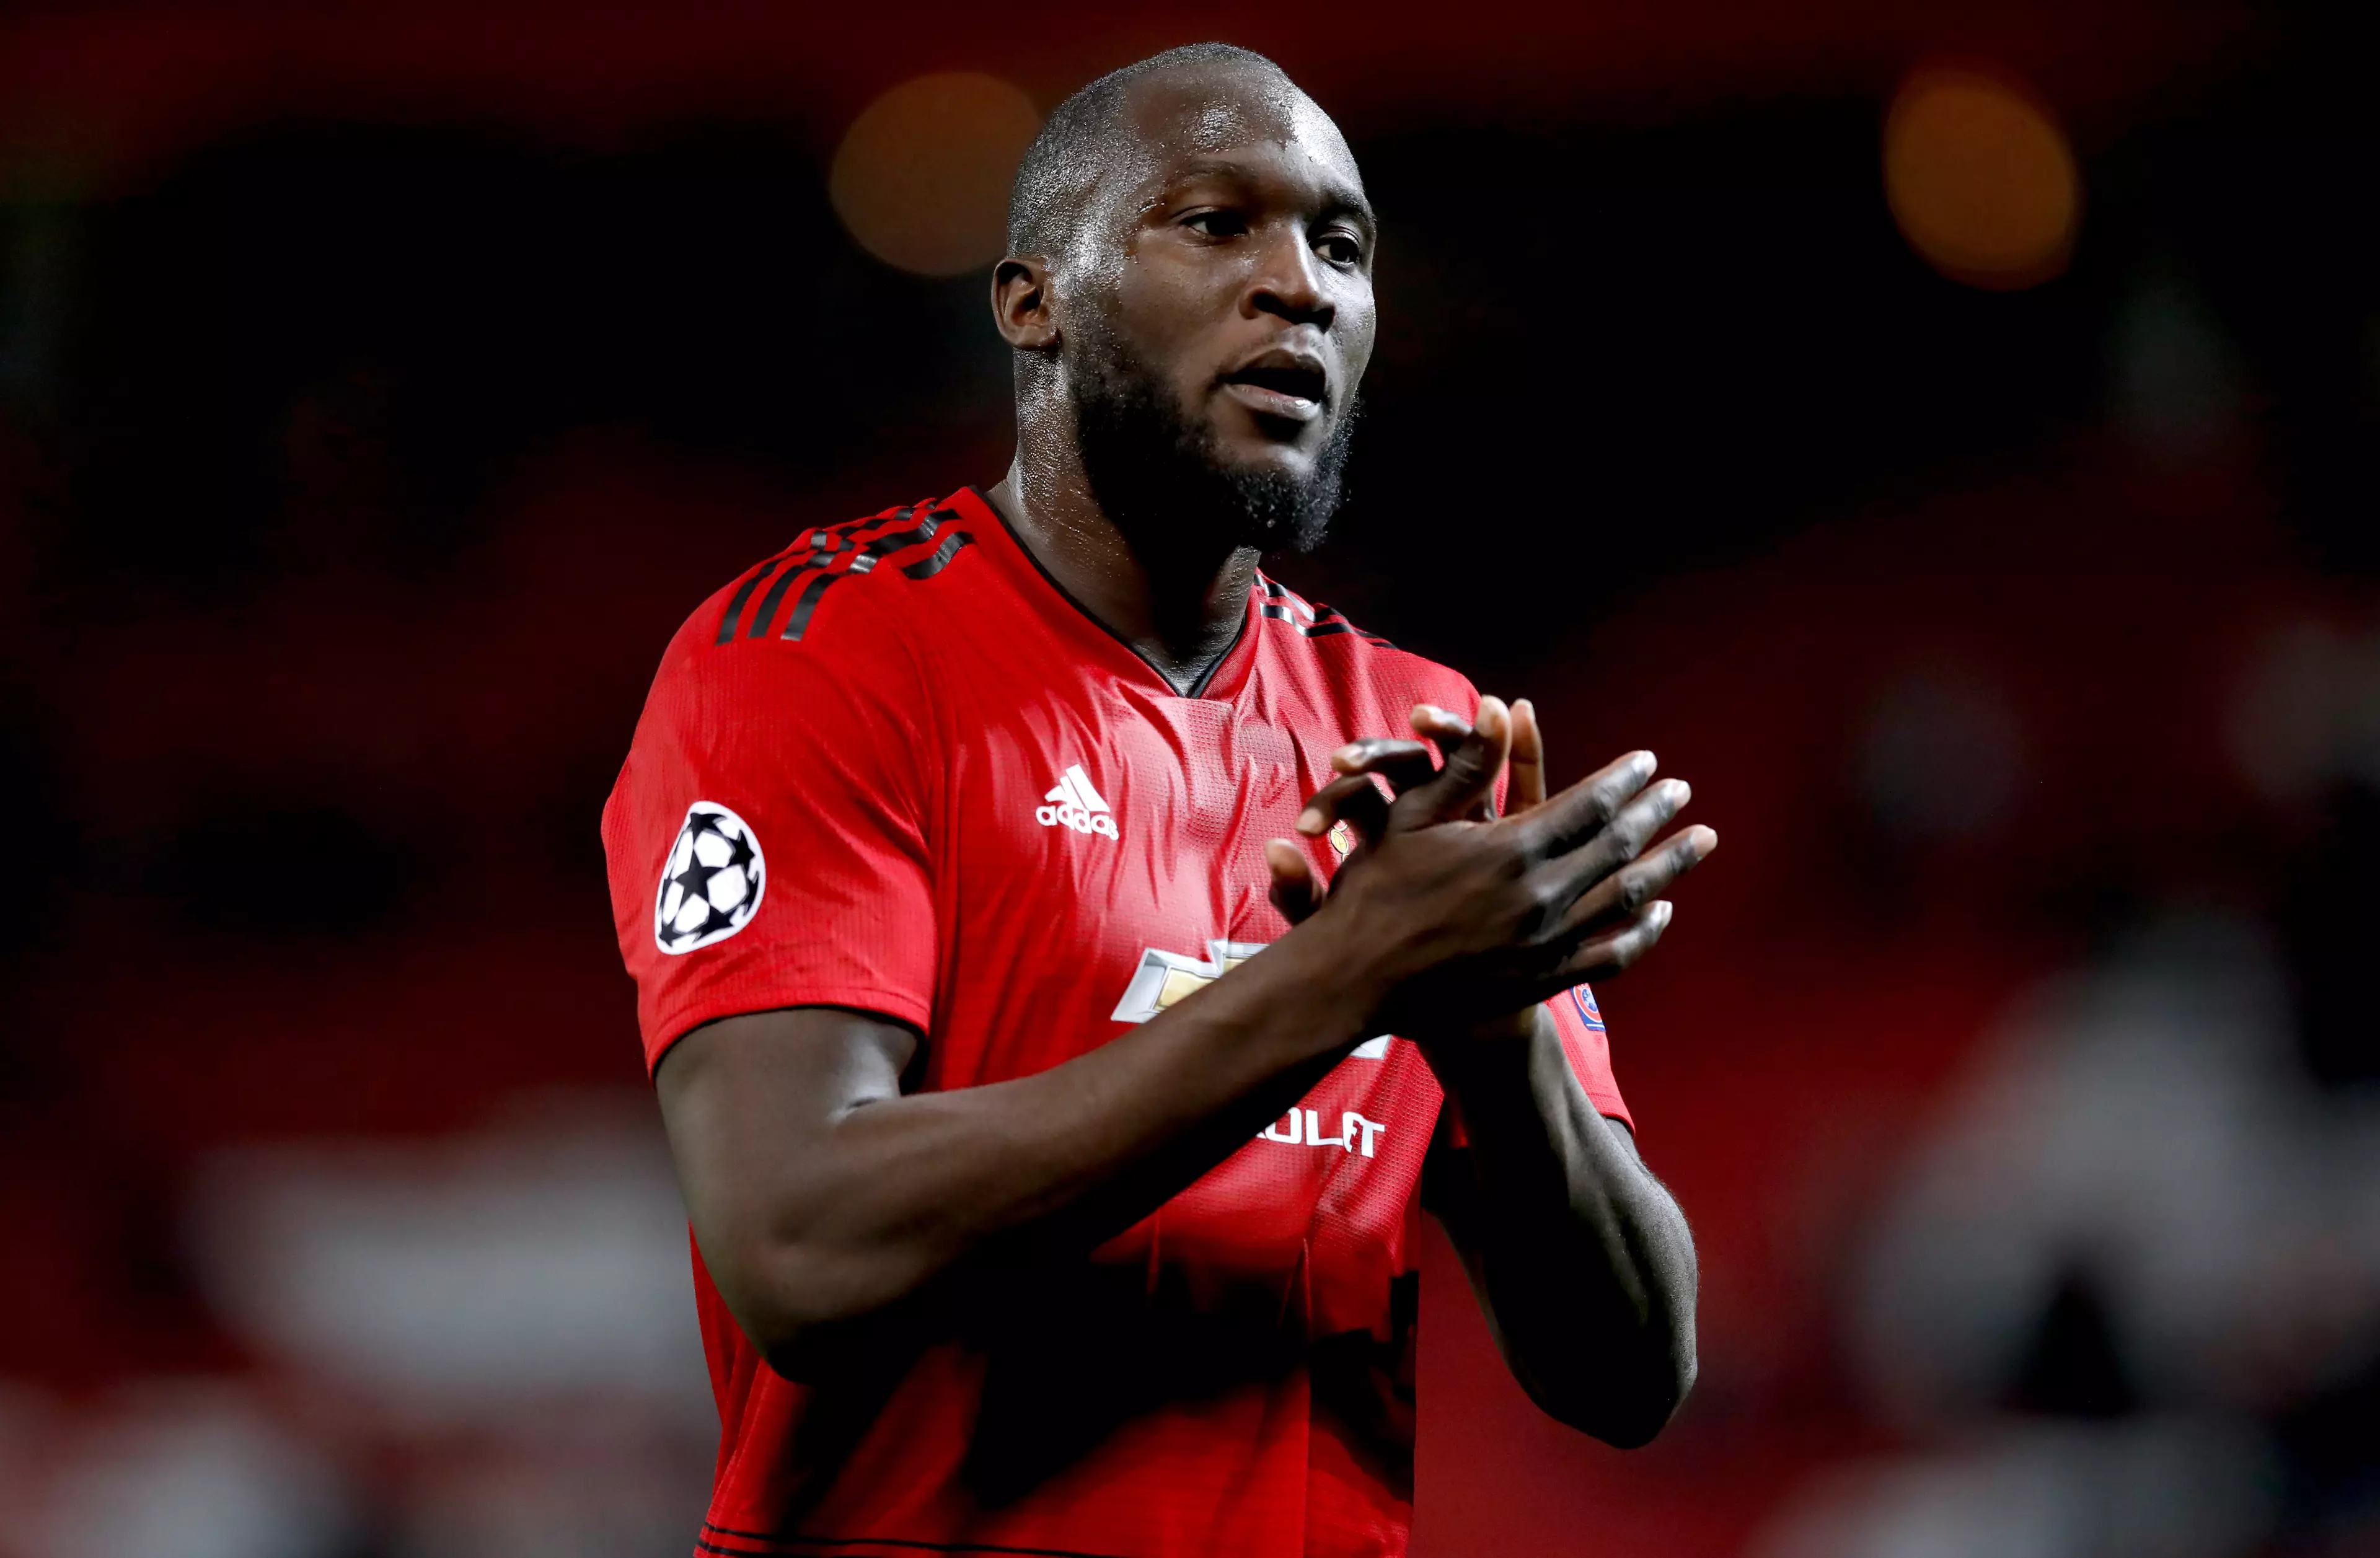 Manchester United Agree £73m Romelu Lukaku Deal With Inter As He Arrives In Milan Ahead Of Deadline Day Move